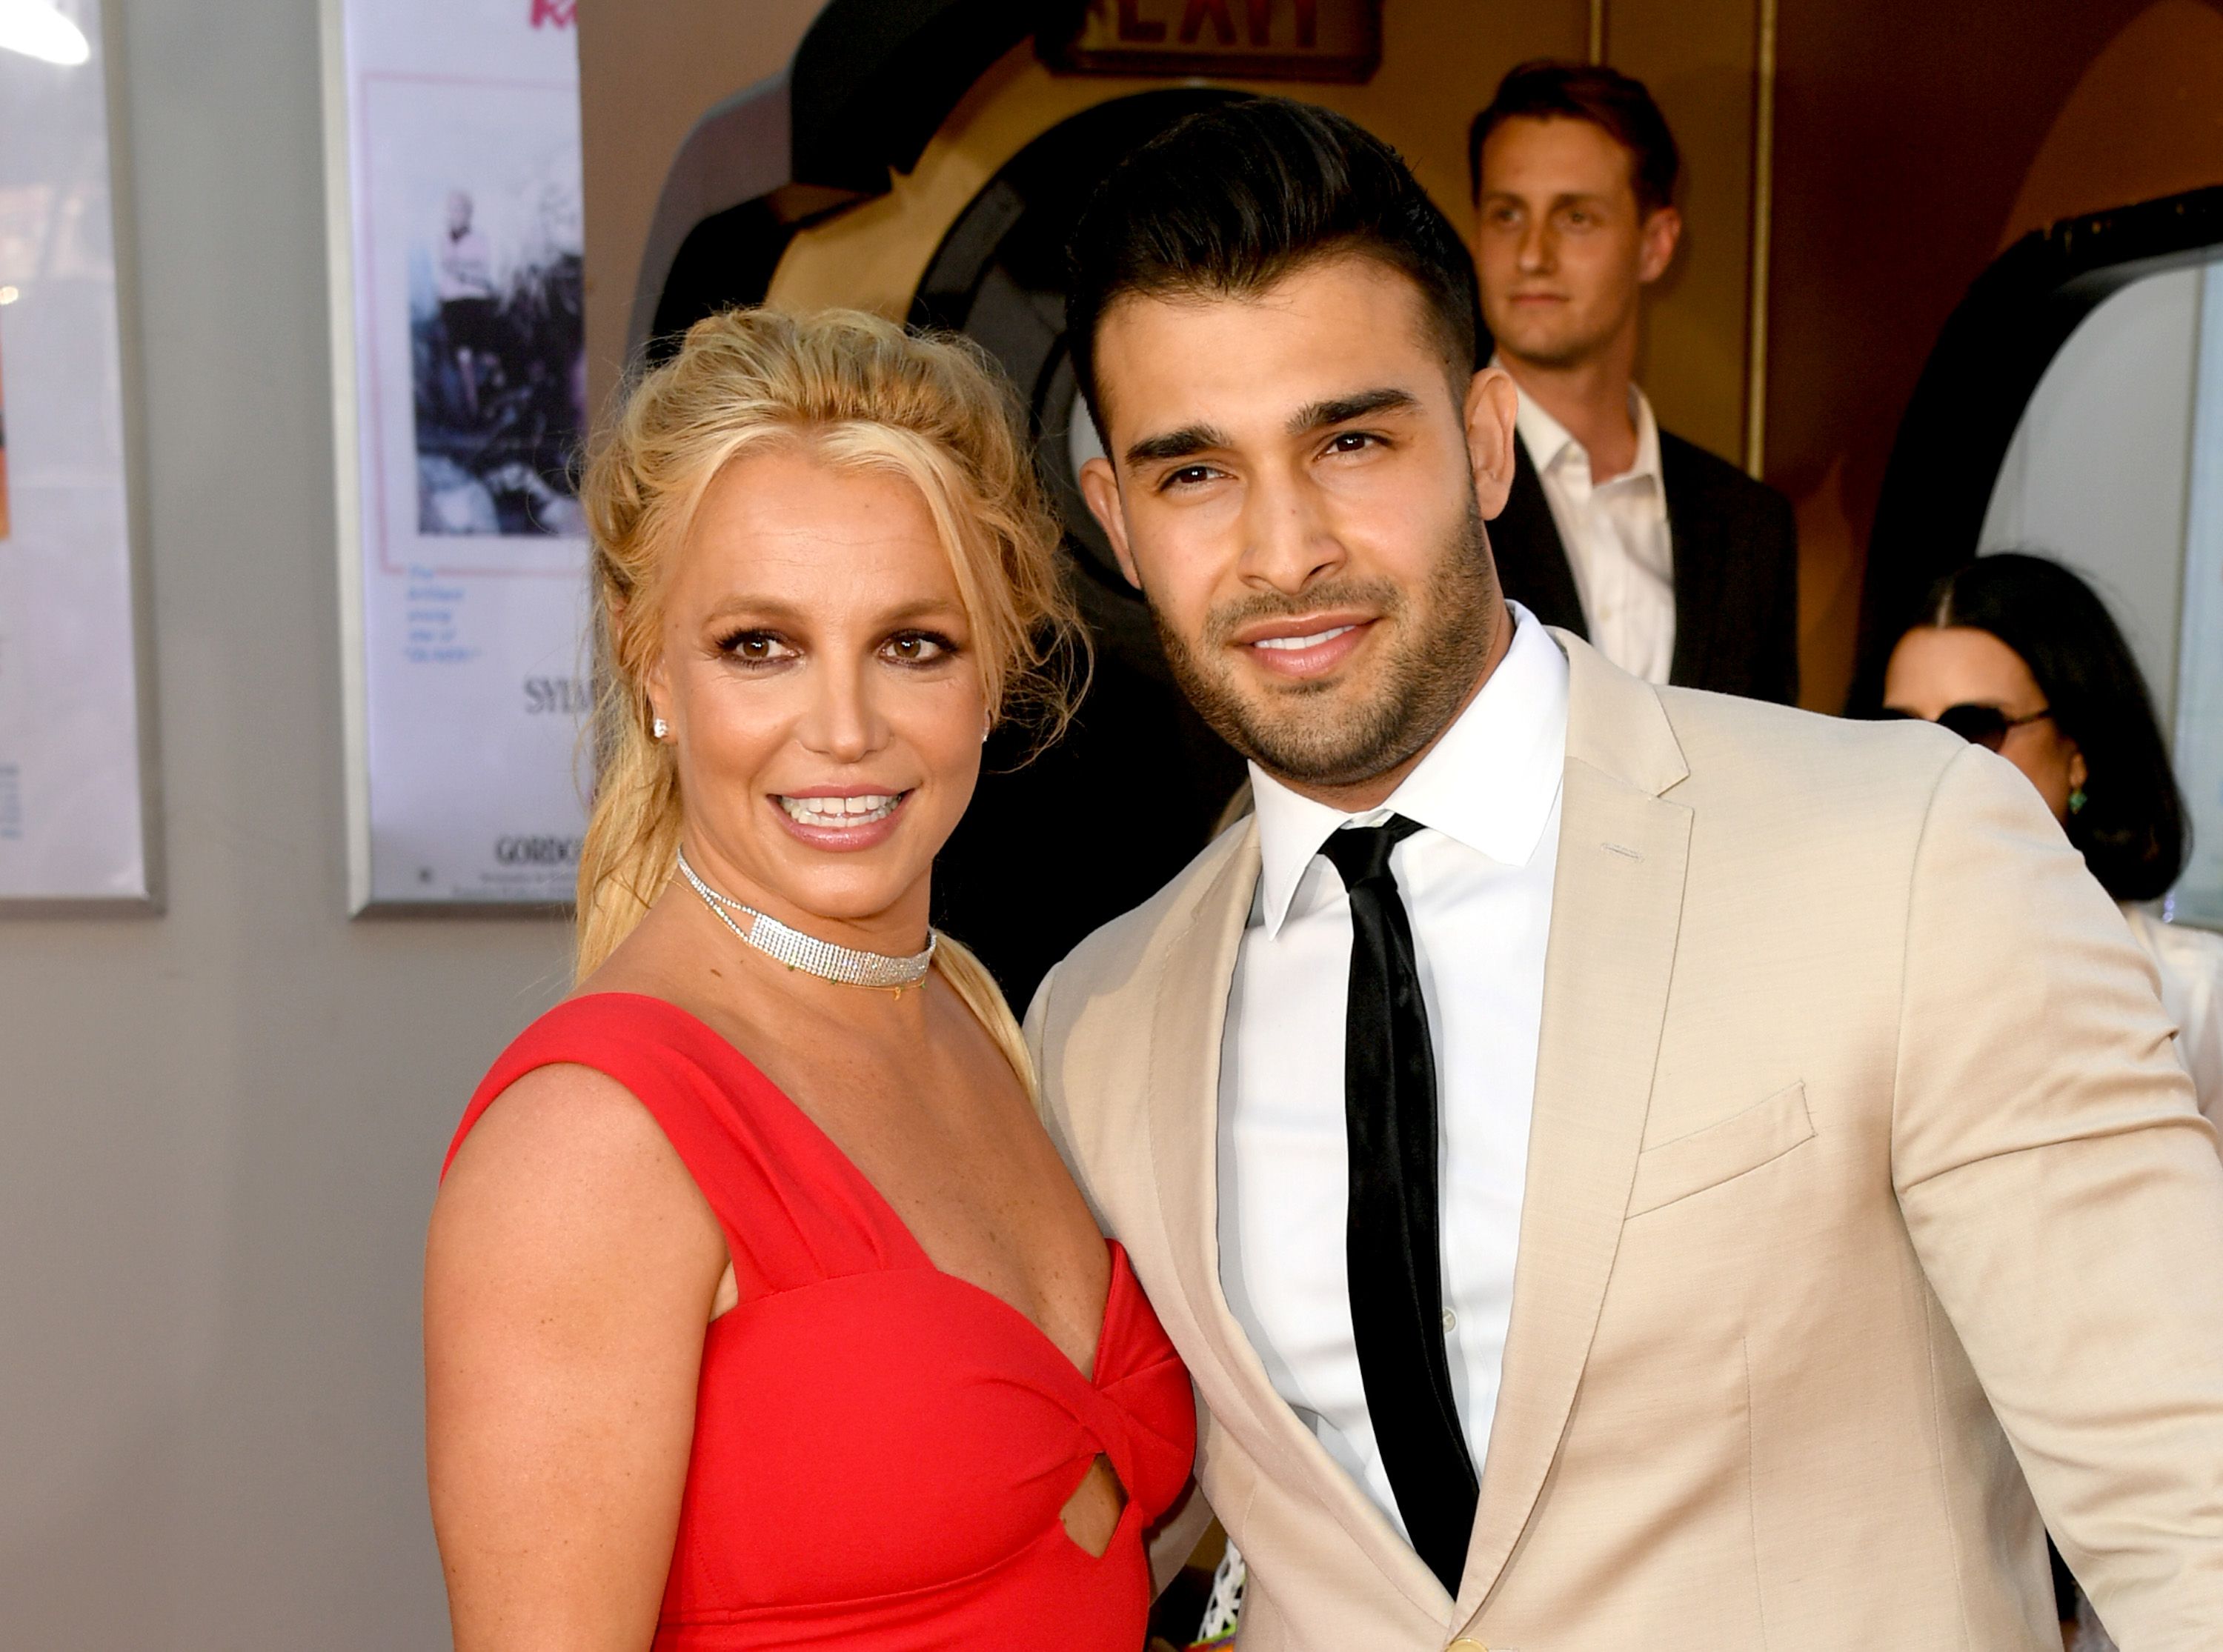 Britney Spears's Boyfriend, Sam Asghari, Has Some Harsh Words for the Singer's Father